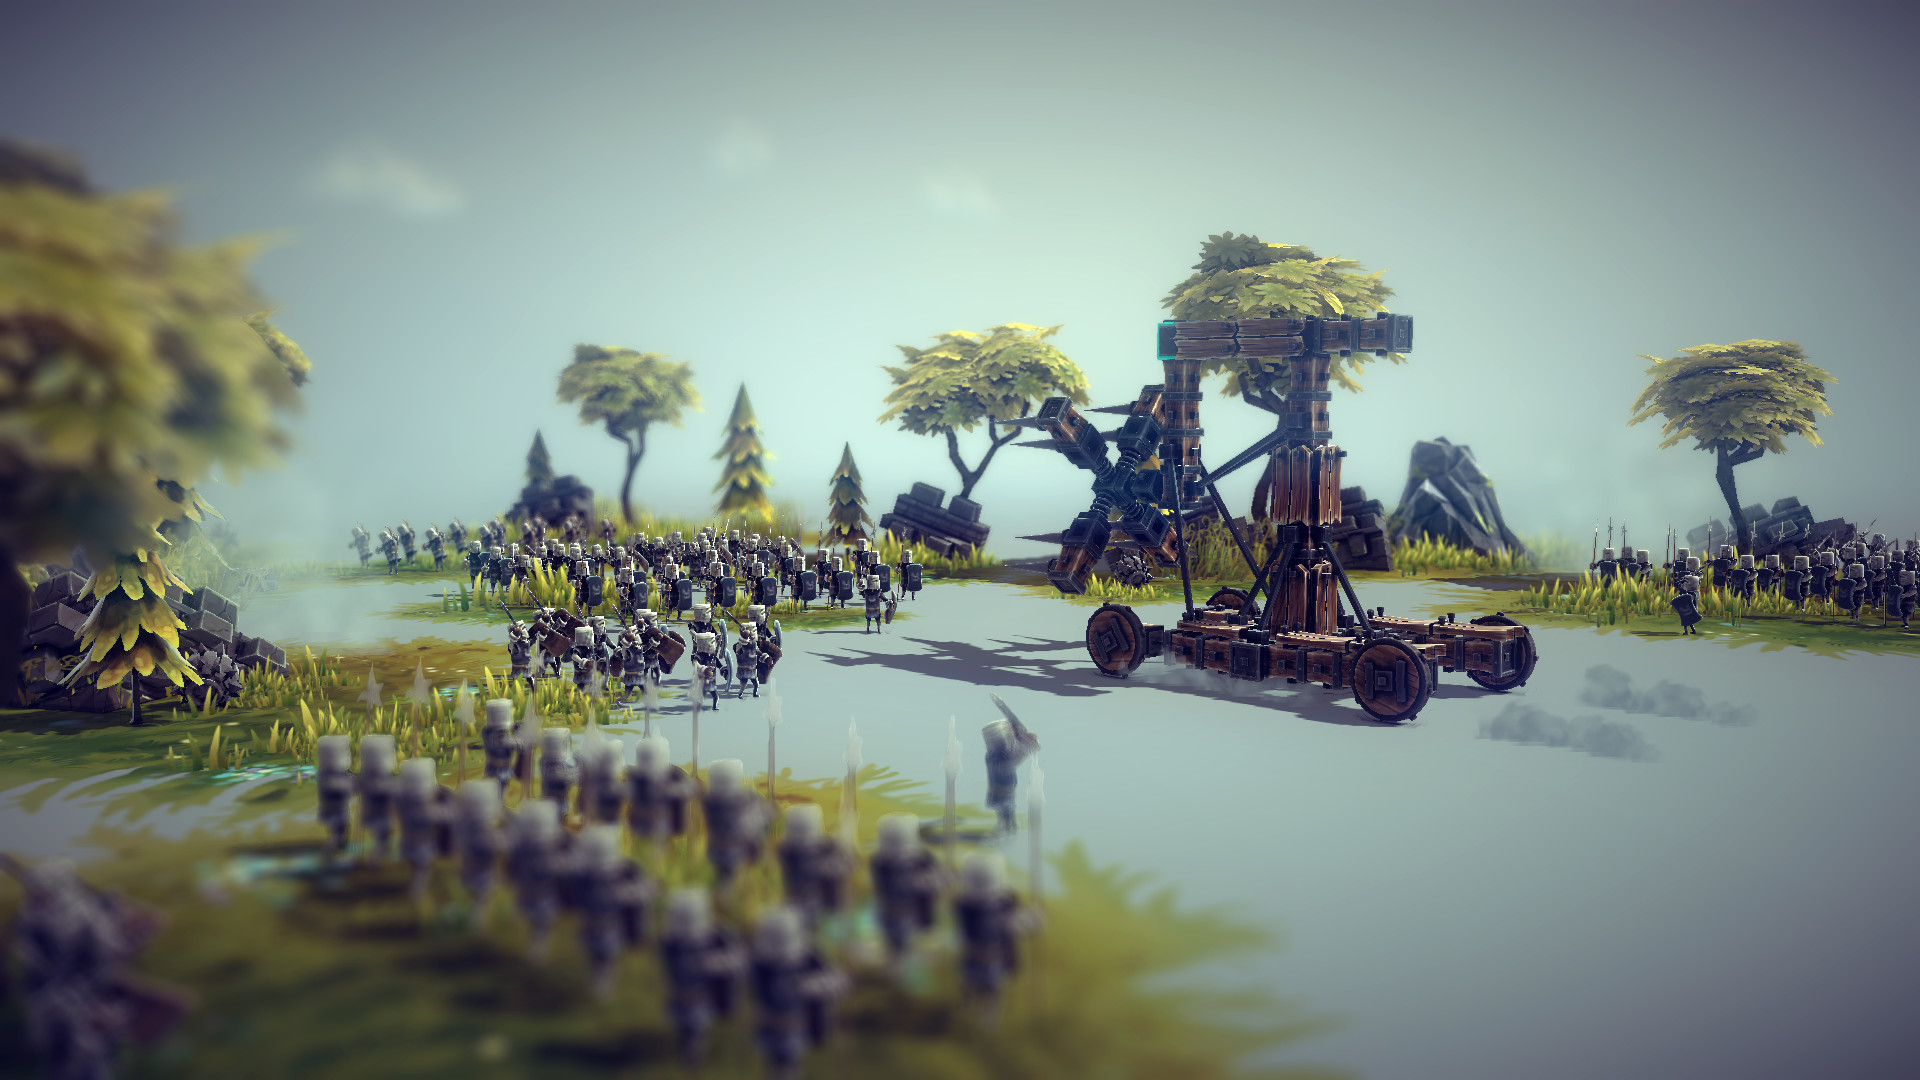 BESIEGE , generate your creations